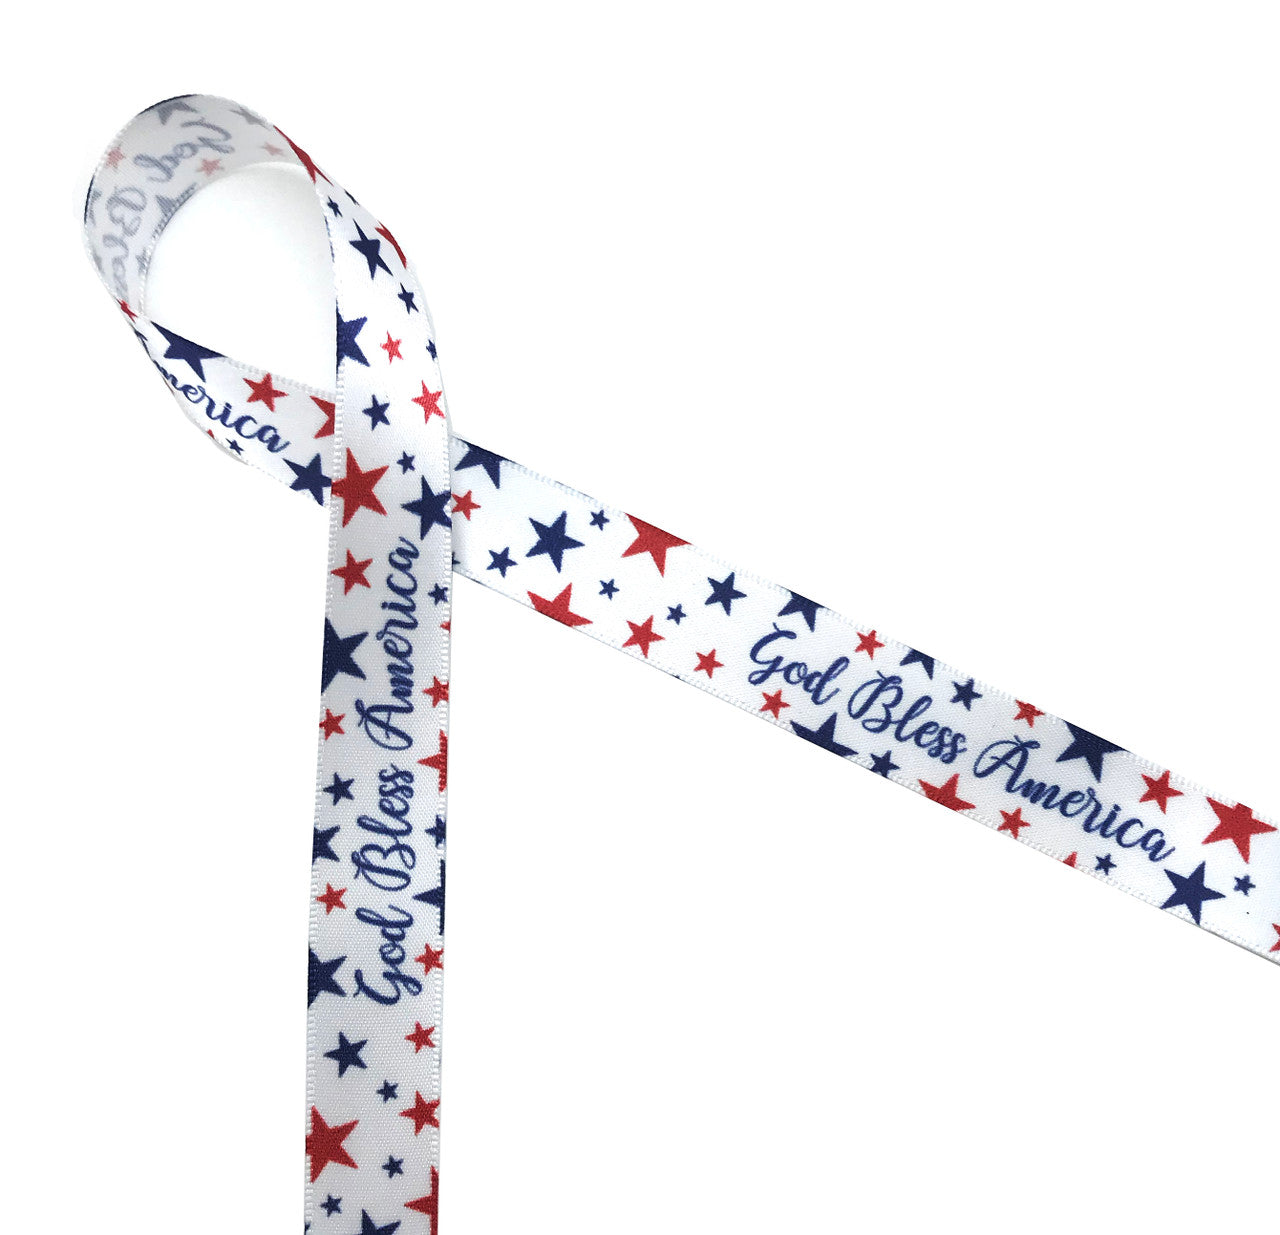 God Bless America ribbon with stars of blue and red printed on 5/8" white single face satin